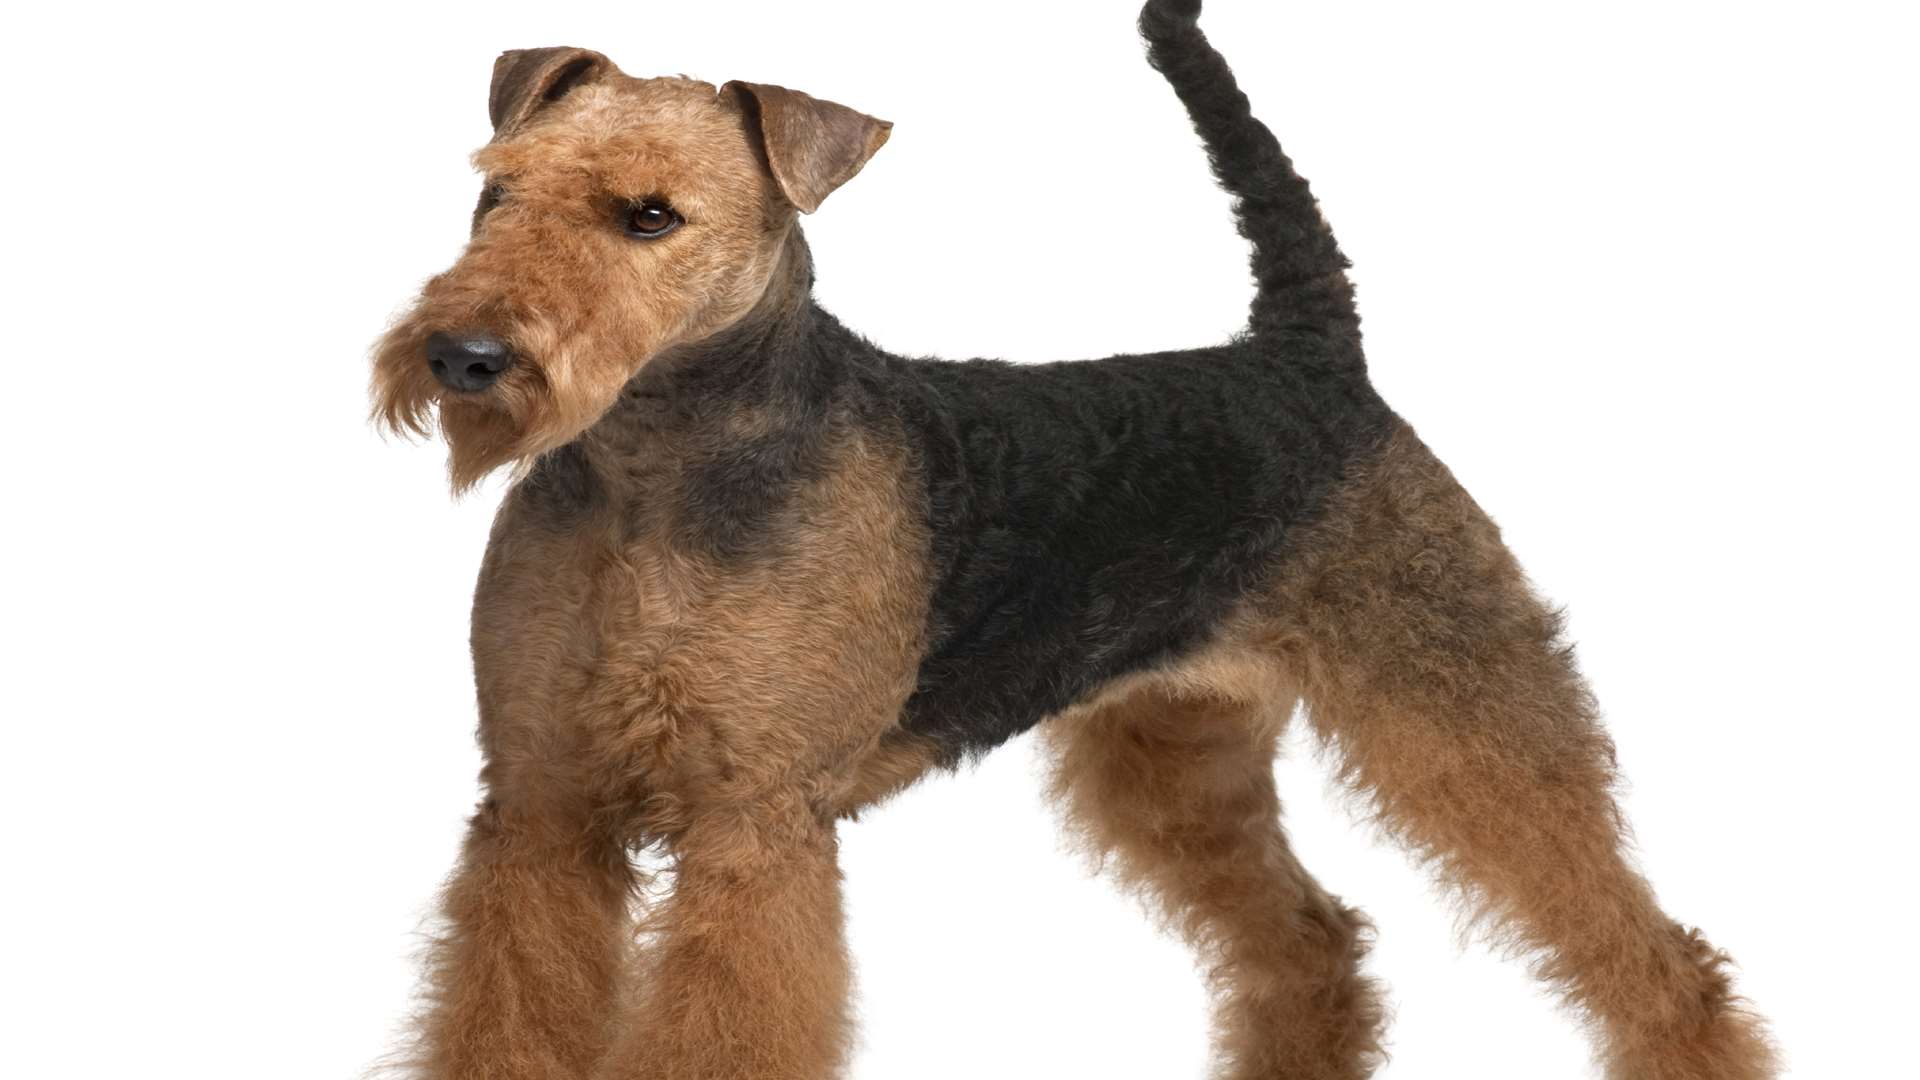 Pamela Curran was left with only one Airedale terrier